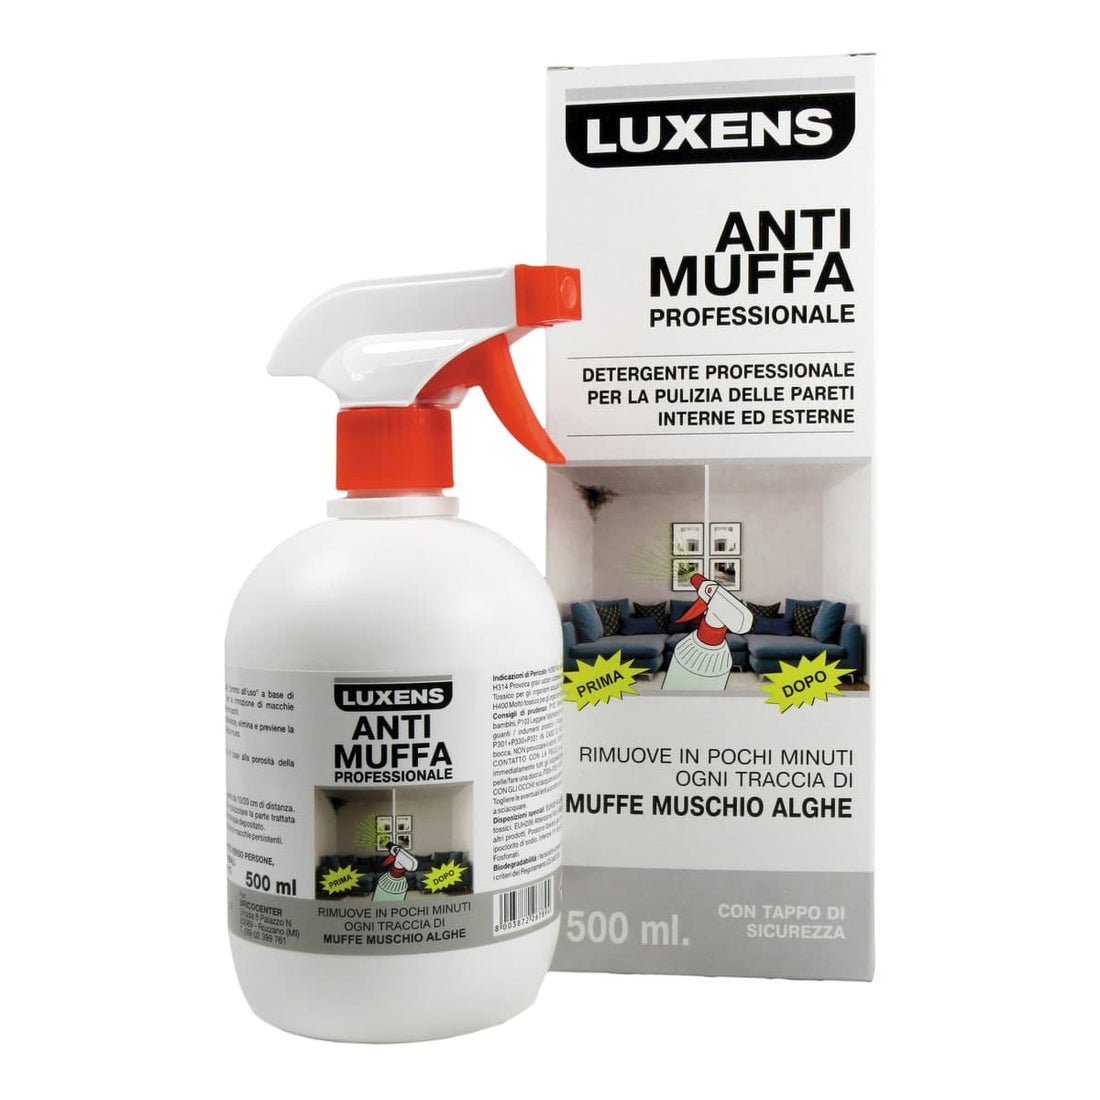 PROFESSIONAL ANTI-MOULD CLEANER 500ML LUXENS - best price from Maltashopper.com BR470541020